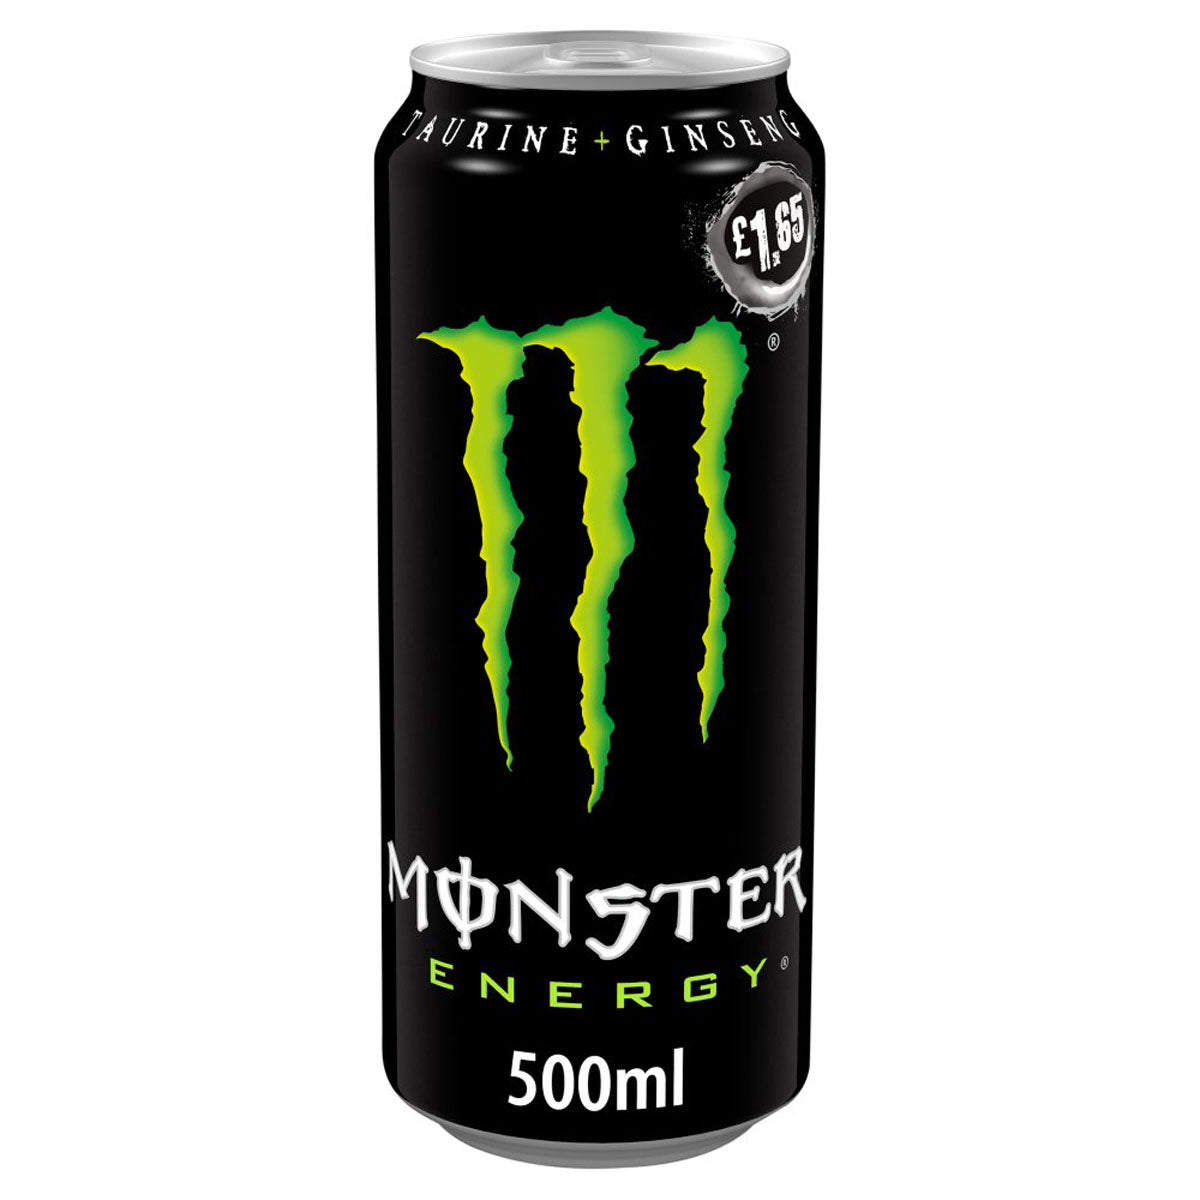 Monster - Energy Drink - 500ml can.